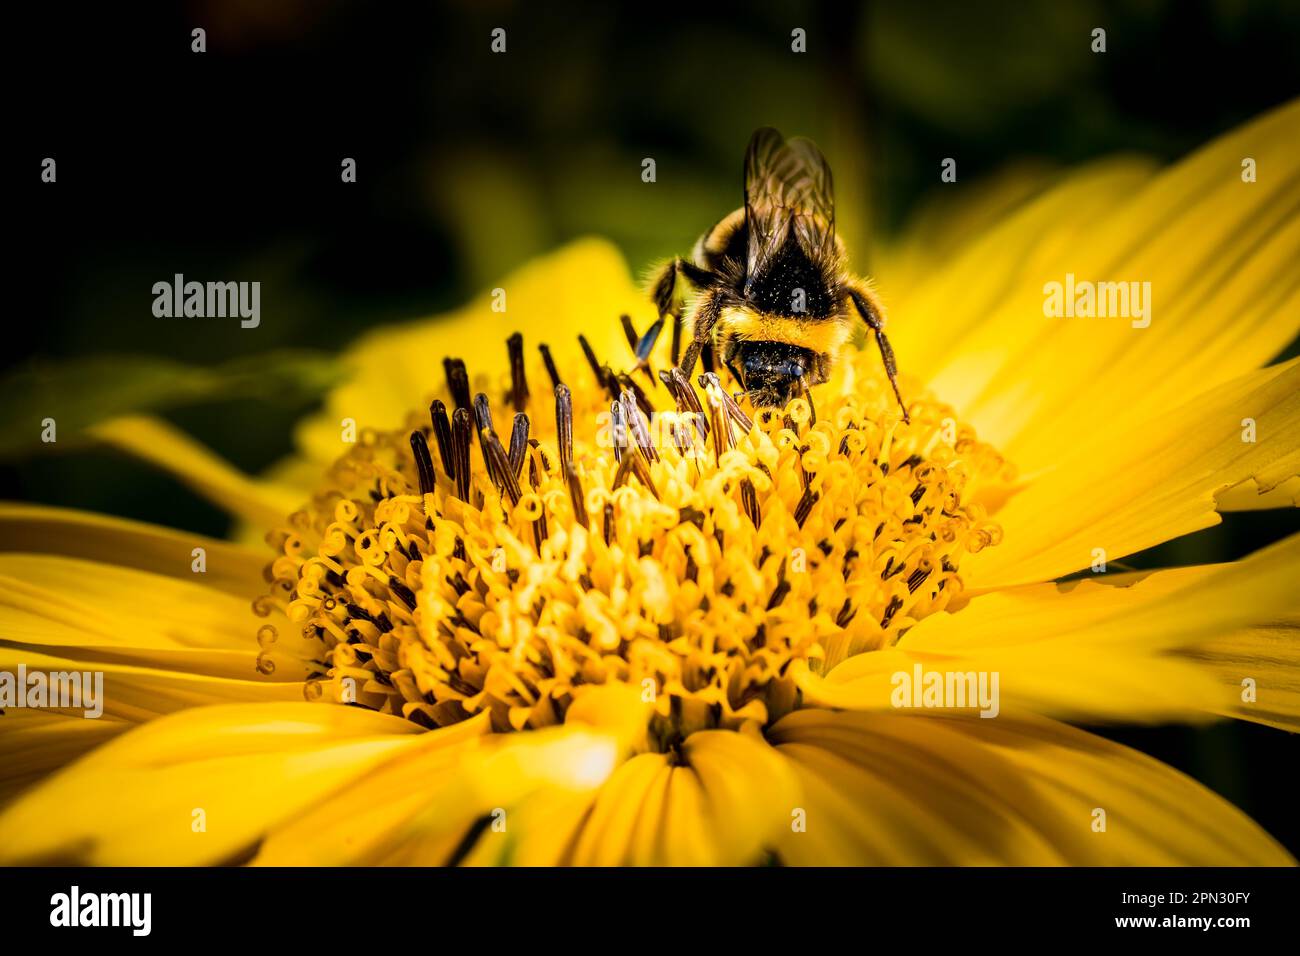 A Bumblebee with black and yellow stripes, collects nectar and pollinates the vibrant golden-yellow Heliopsis Helianthoides flower called Summer Sun. Stock Photo